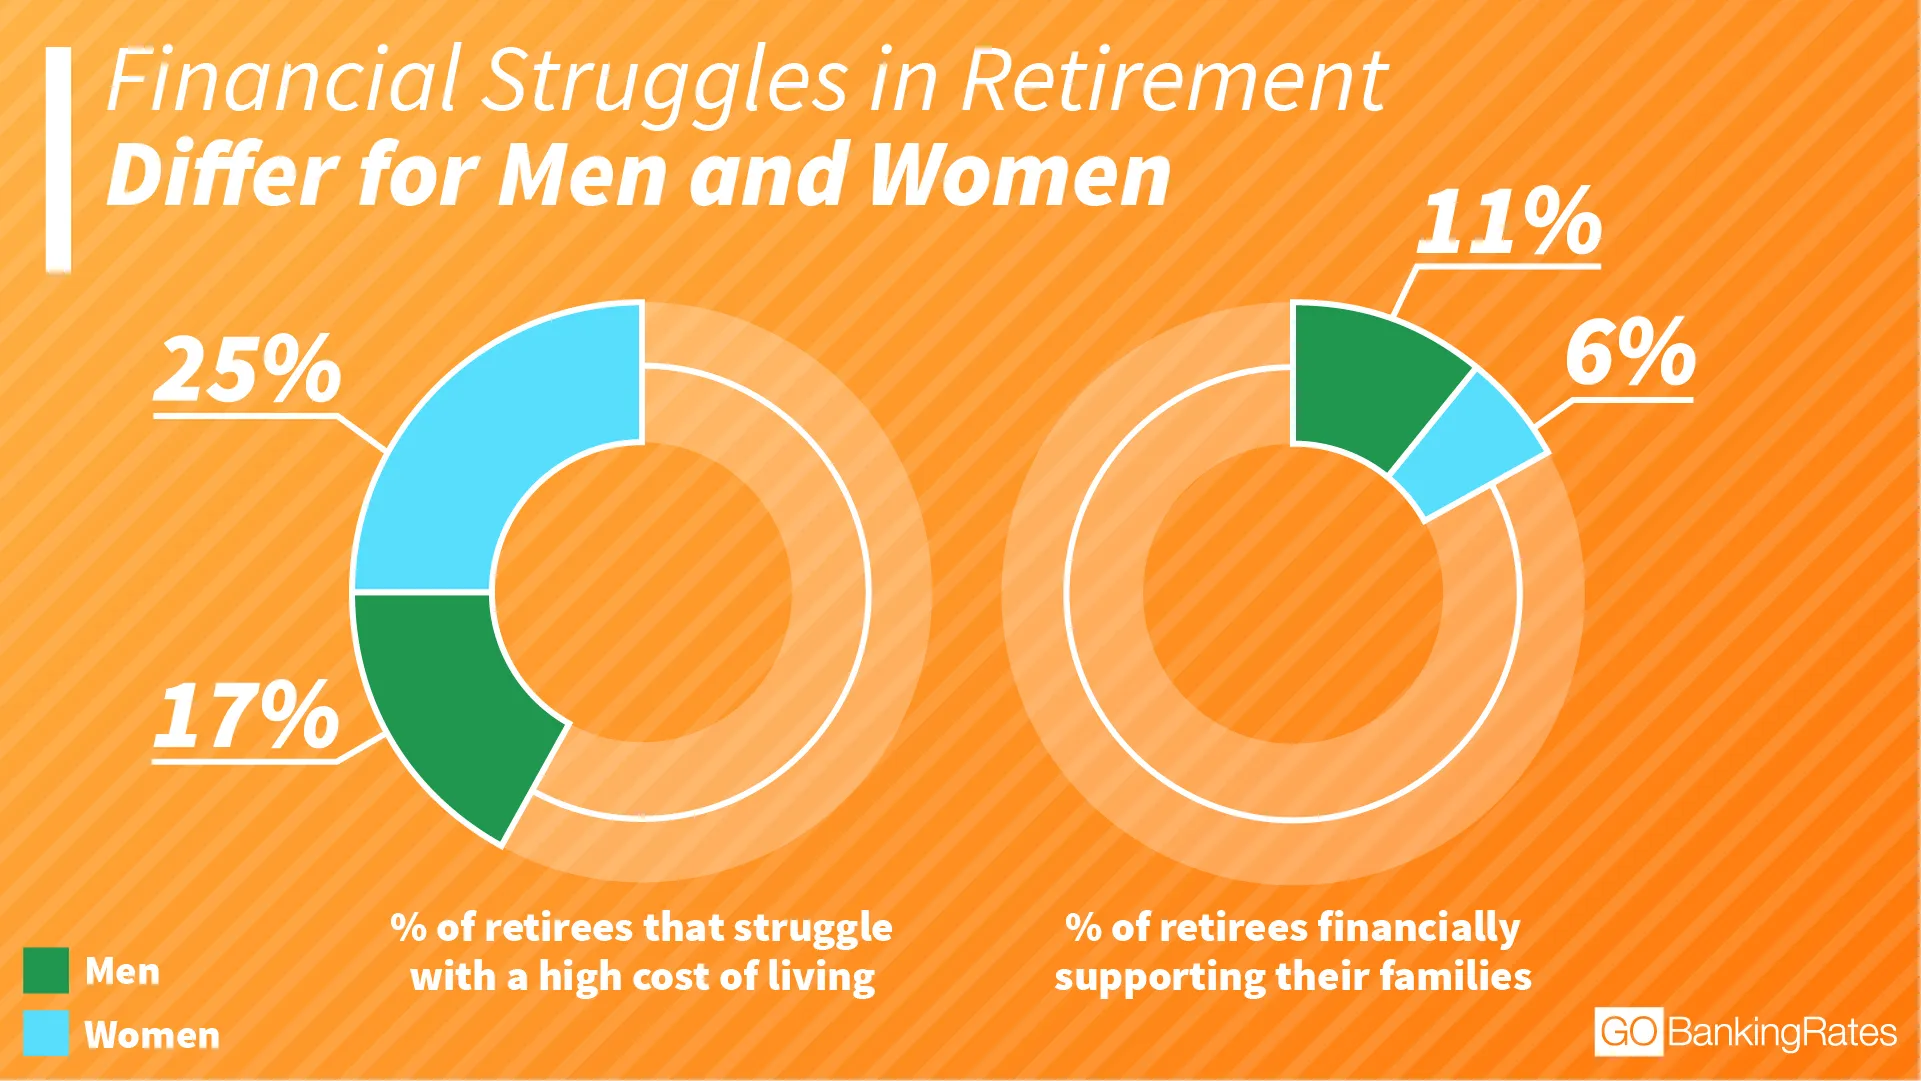 financial struggles of men and women